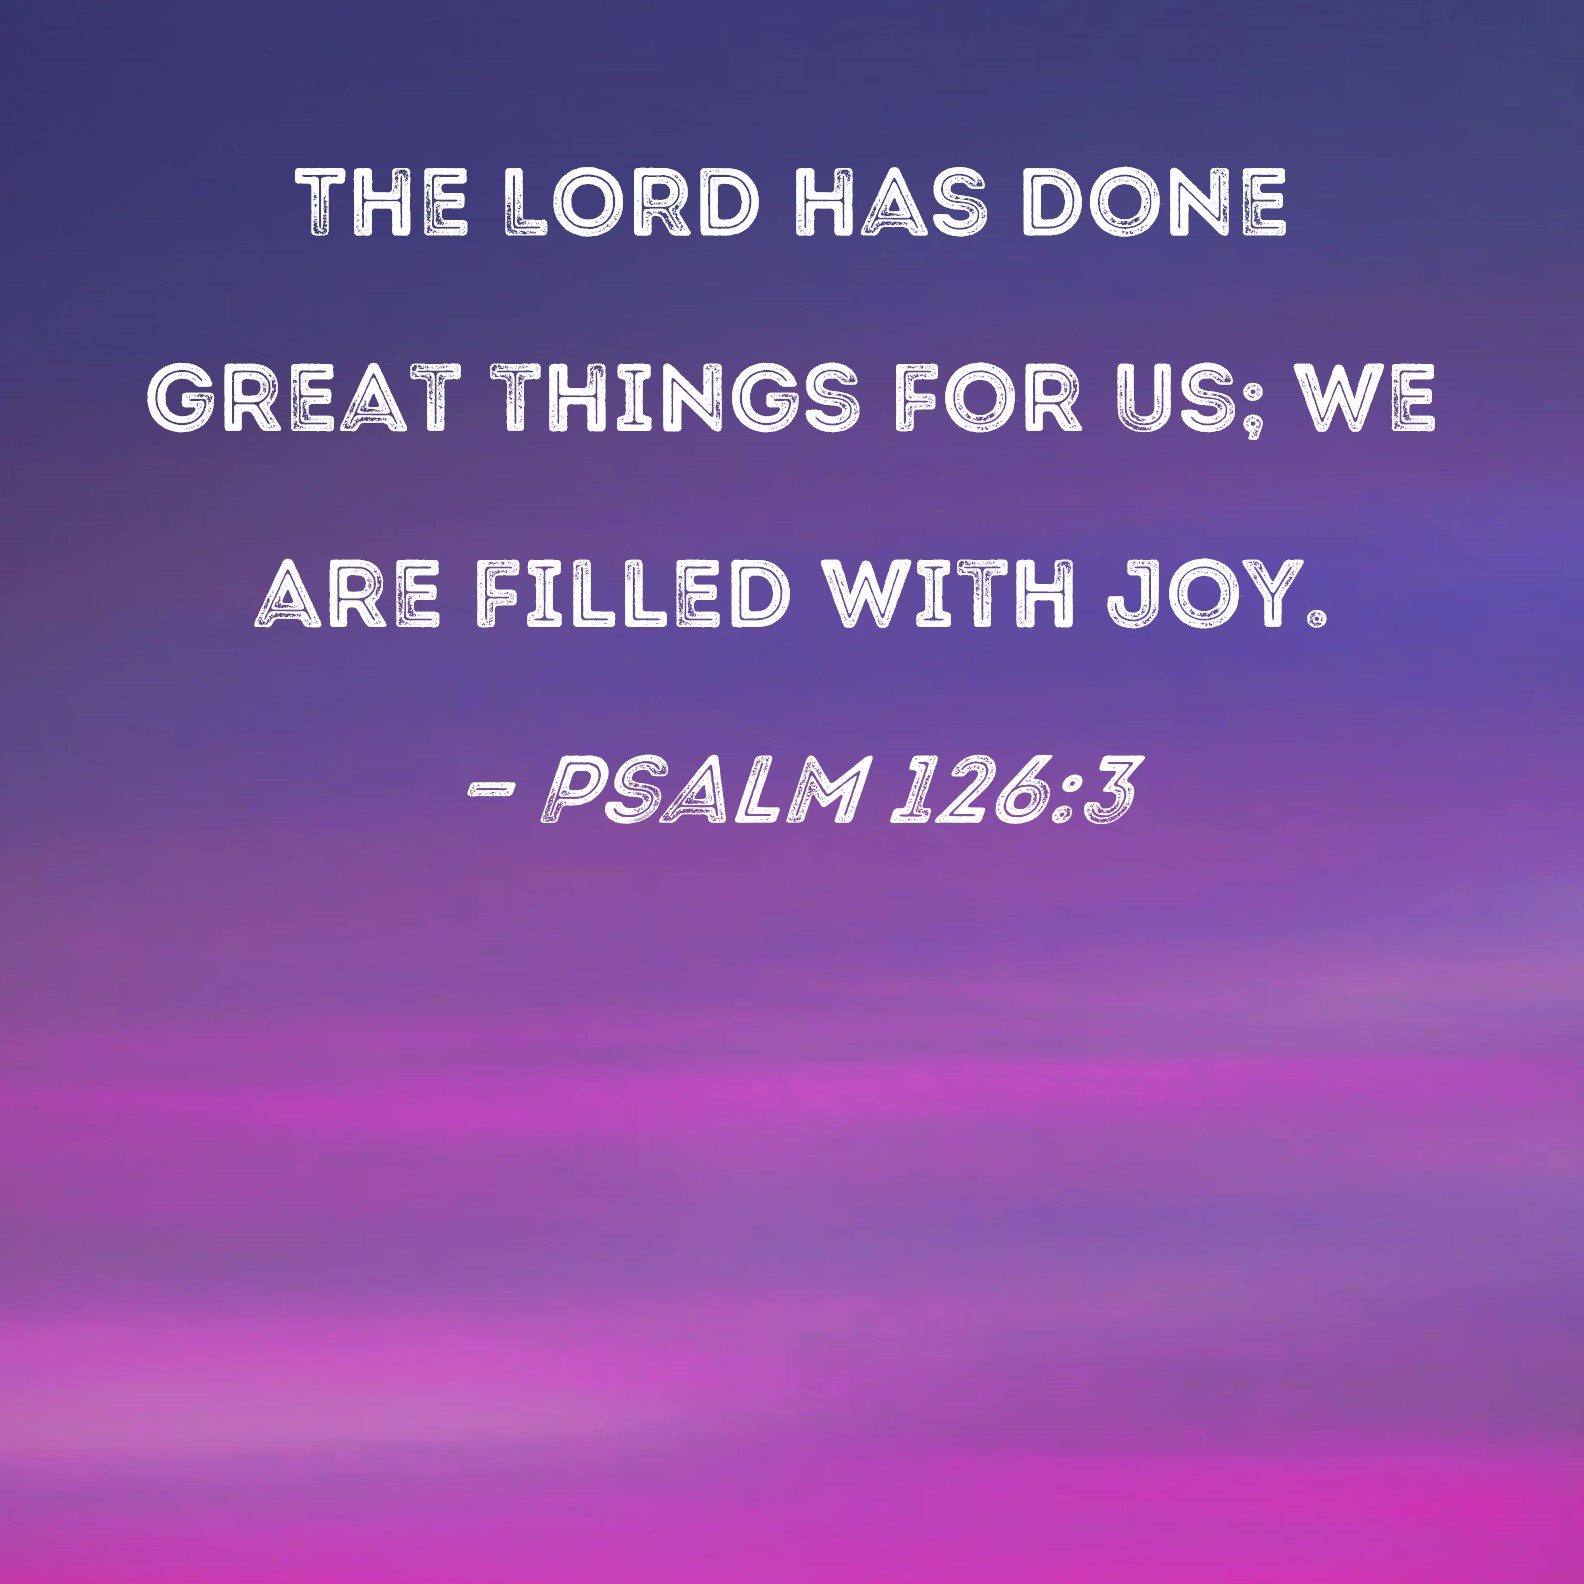 psalm-126-3-the-lord-has-done-great-things-for-us-we-are-filled-with-joy